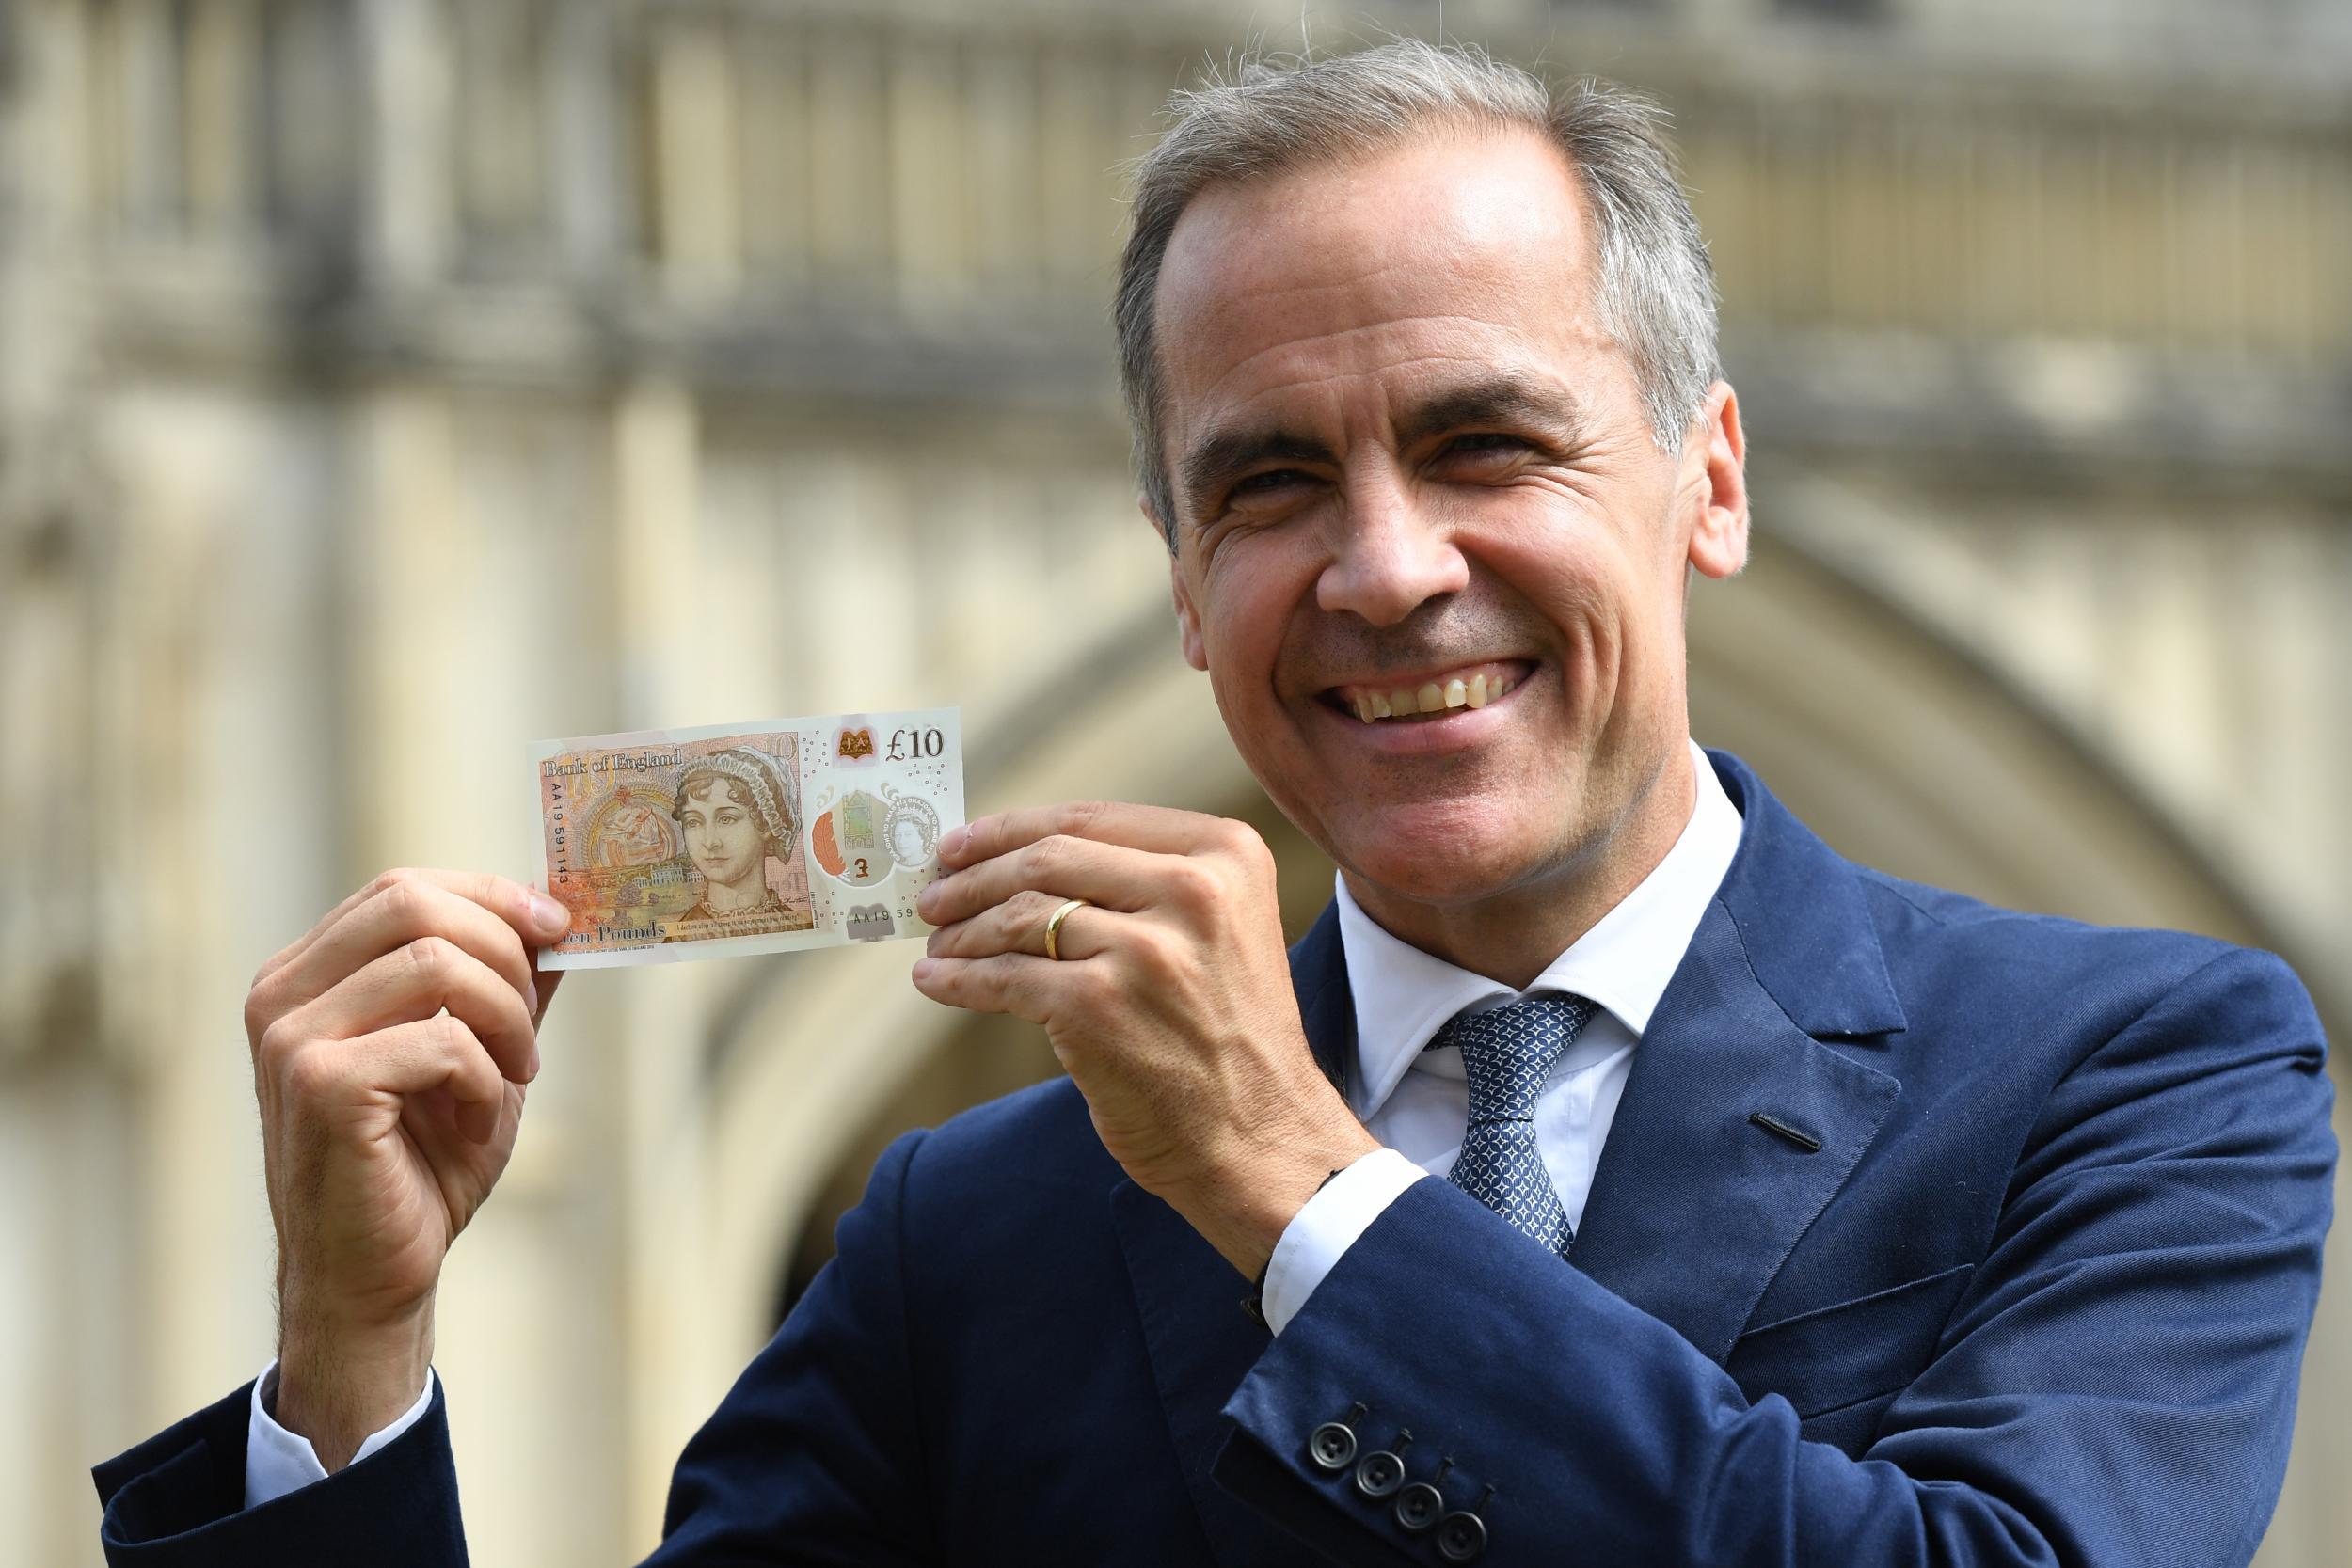 Mark Carney had reason to smile as sterling enjoyed its best week since February 2009